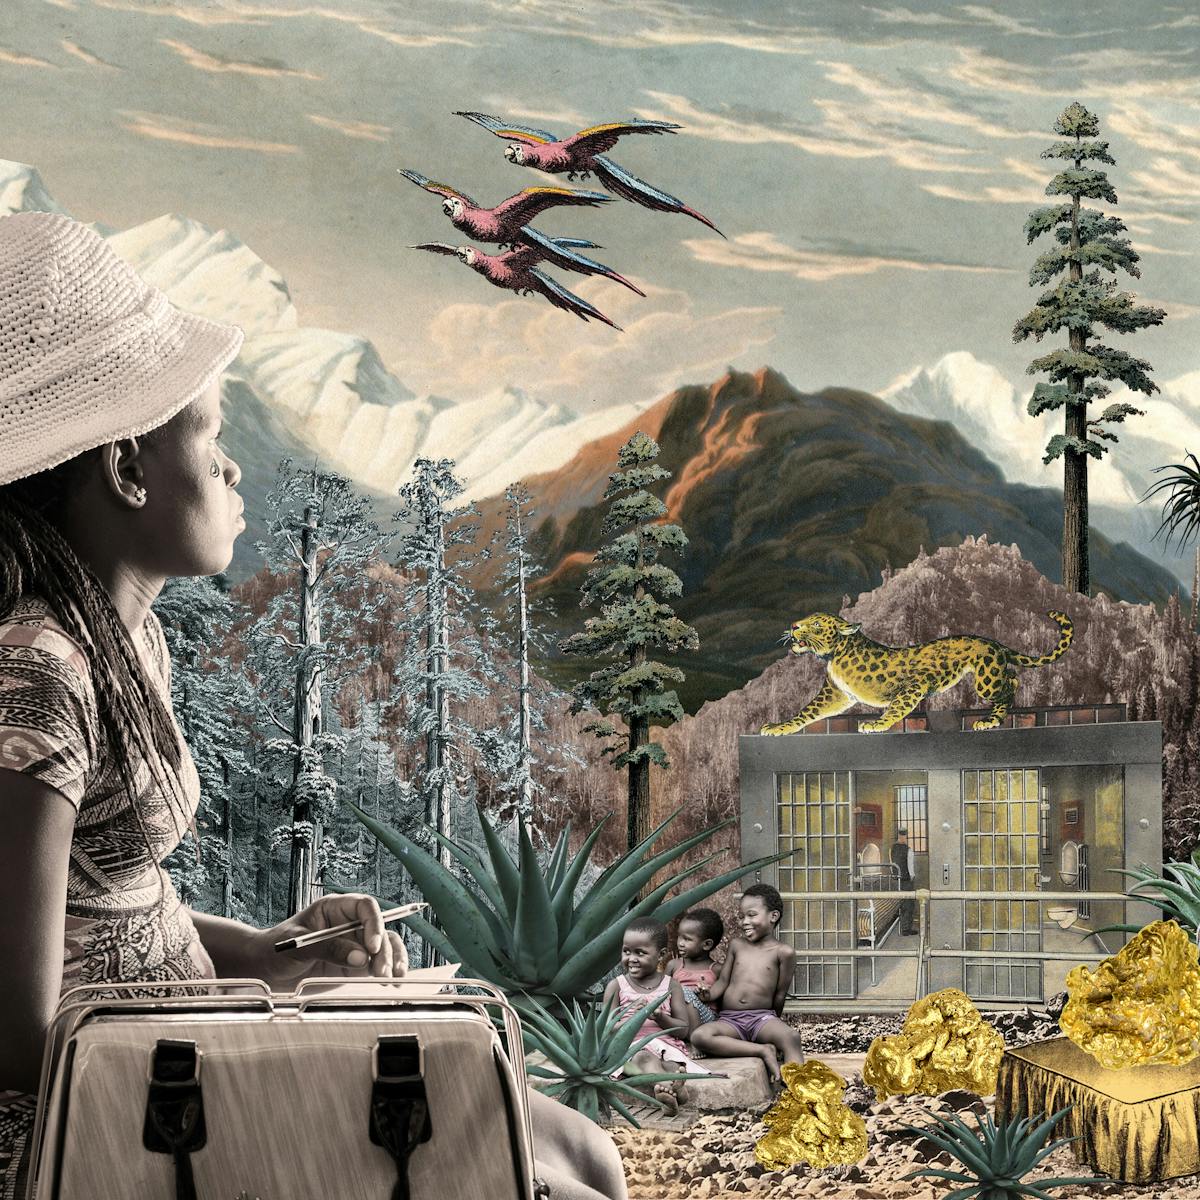 Artwork using collage. The collaged elements are made up of archive material which includes vintage and contemporary photographs, etchings, painted illustrations, lithographic prints and line drawings. This artwork depicts a scene with an urban and rural combined background, where high mountains and hills rise in the distance. In the middle distance are a series of tall trees and a jail like structure with bars. On top of the jail stands a large leopard looking up to the sky. In front of the jail are several large agave plants. Seated amongst them are three young children, smiling. To the right of the children is a large gold covered bed with a large gold nugget on top. At the foot of the bed are 2 more golden nuggets. Siting on the headboard is a colourful parrot in red, blue and orange. To the right of the parrot is a modern glass building with a long pathway leading up to the entrance. In the foreground on the left side of the image is a woman wearing a pattered dress and knitted to crocheted hat. Beside her is a large handbag. In her hand she is holding a biro and a piece of paper. She is looking away into the distant hills with a tear rolling down her right cheek. In the cloud scattered sky above are 3 parrots in flight and a large moon like orb. A blue bird sits in a high tree on the right, a pink heart shape in its mouth.